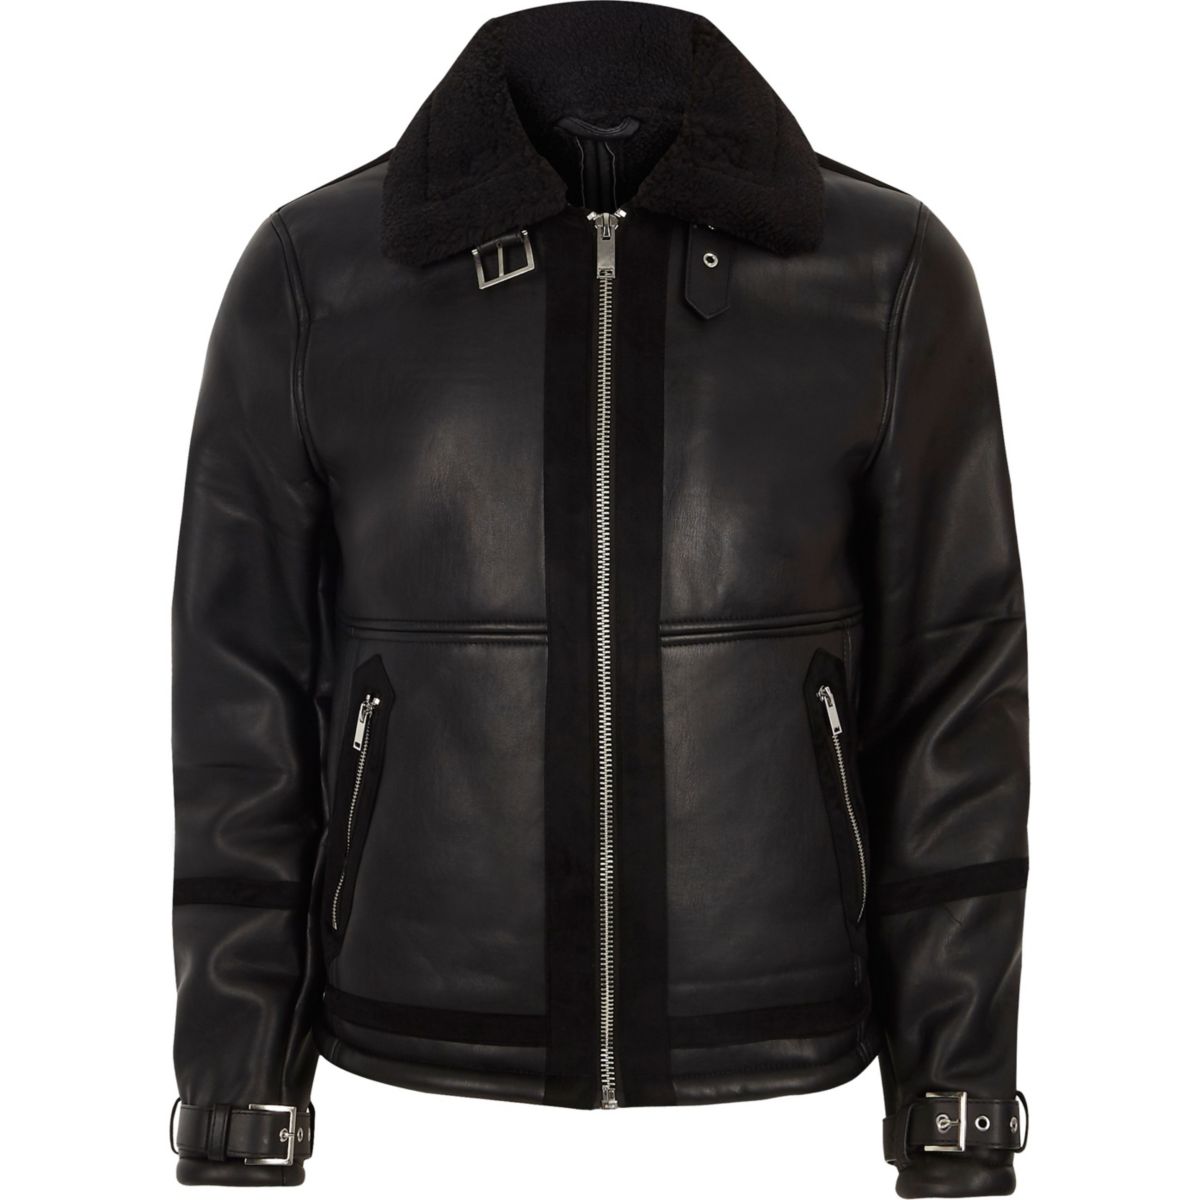 Leather & Leather Look Jackets | Men Coats & Jackets | River Island